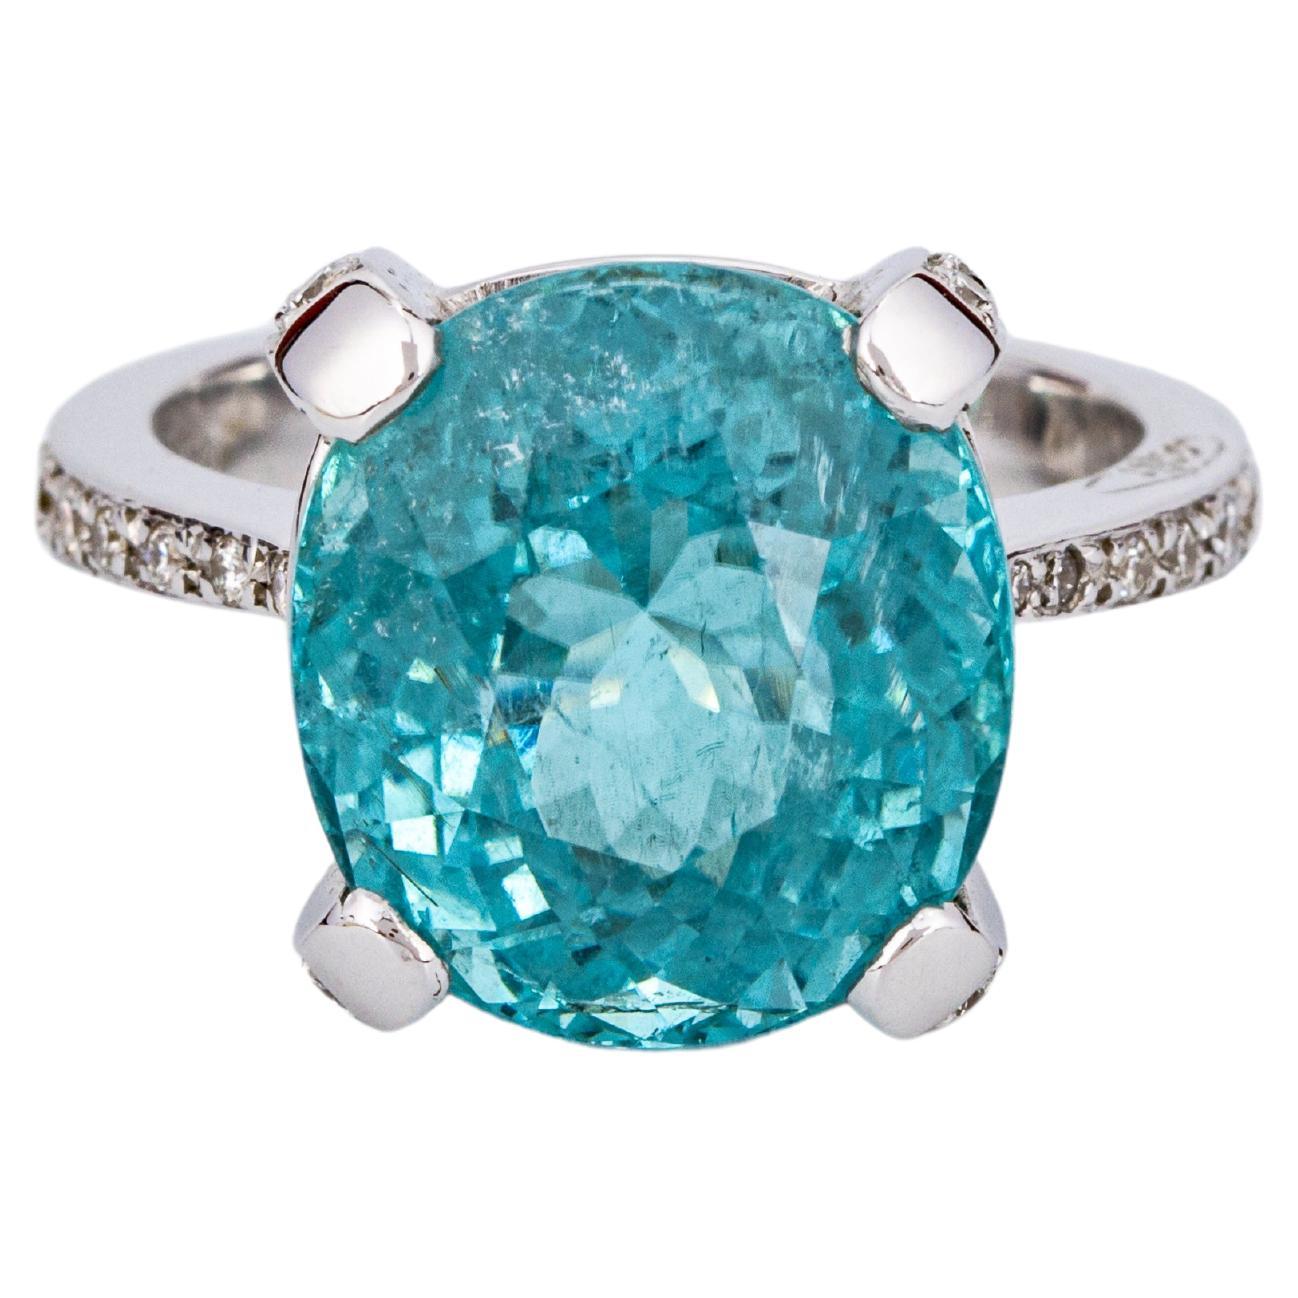 "Costis" Four Claw Ring with 11.97 crts African Paraiba Tourmaline and Diamonds